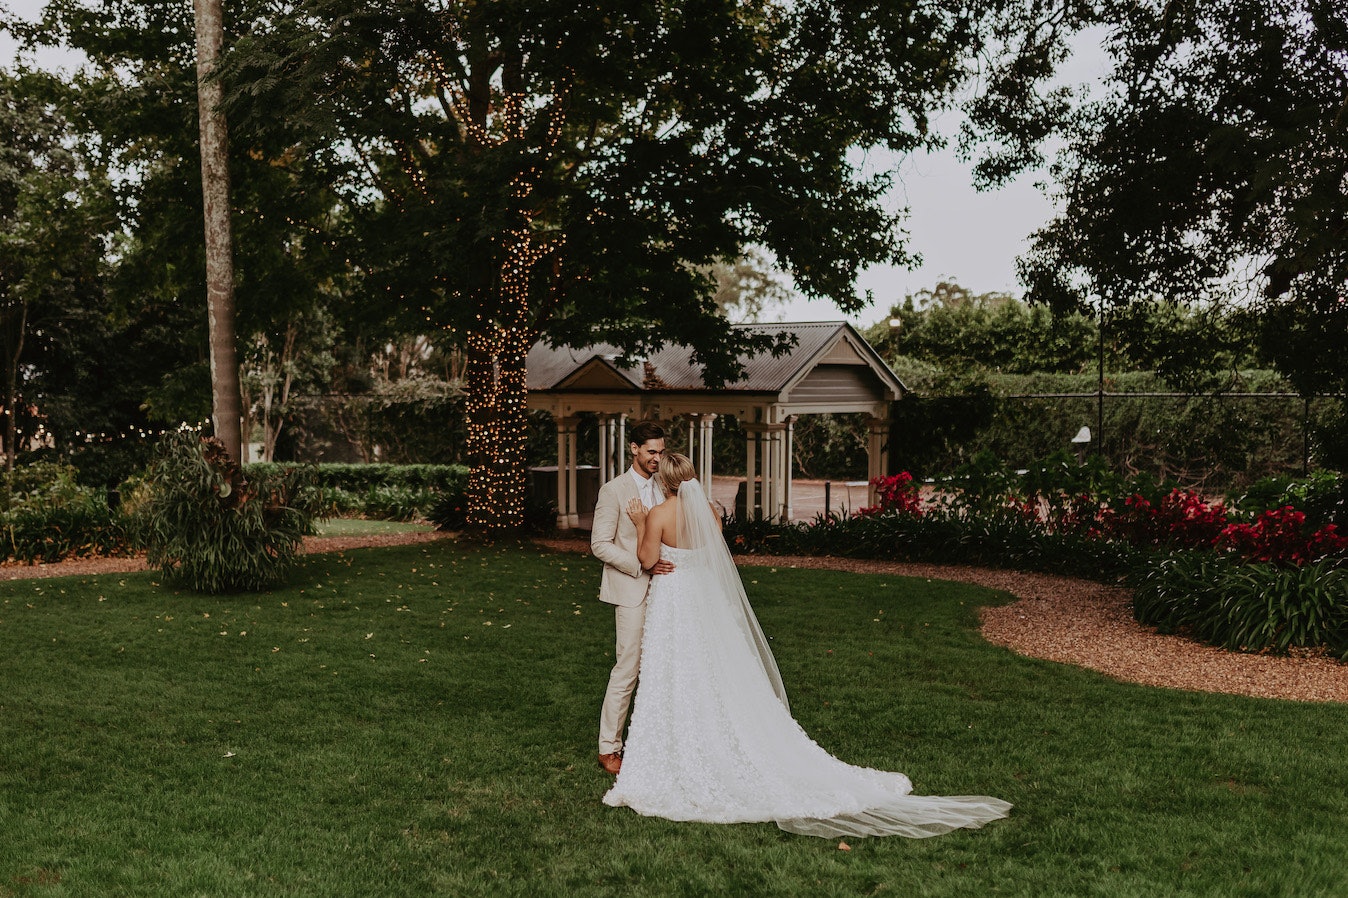 Bride and groom standing on lawn